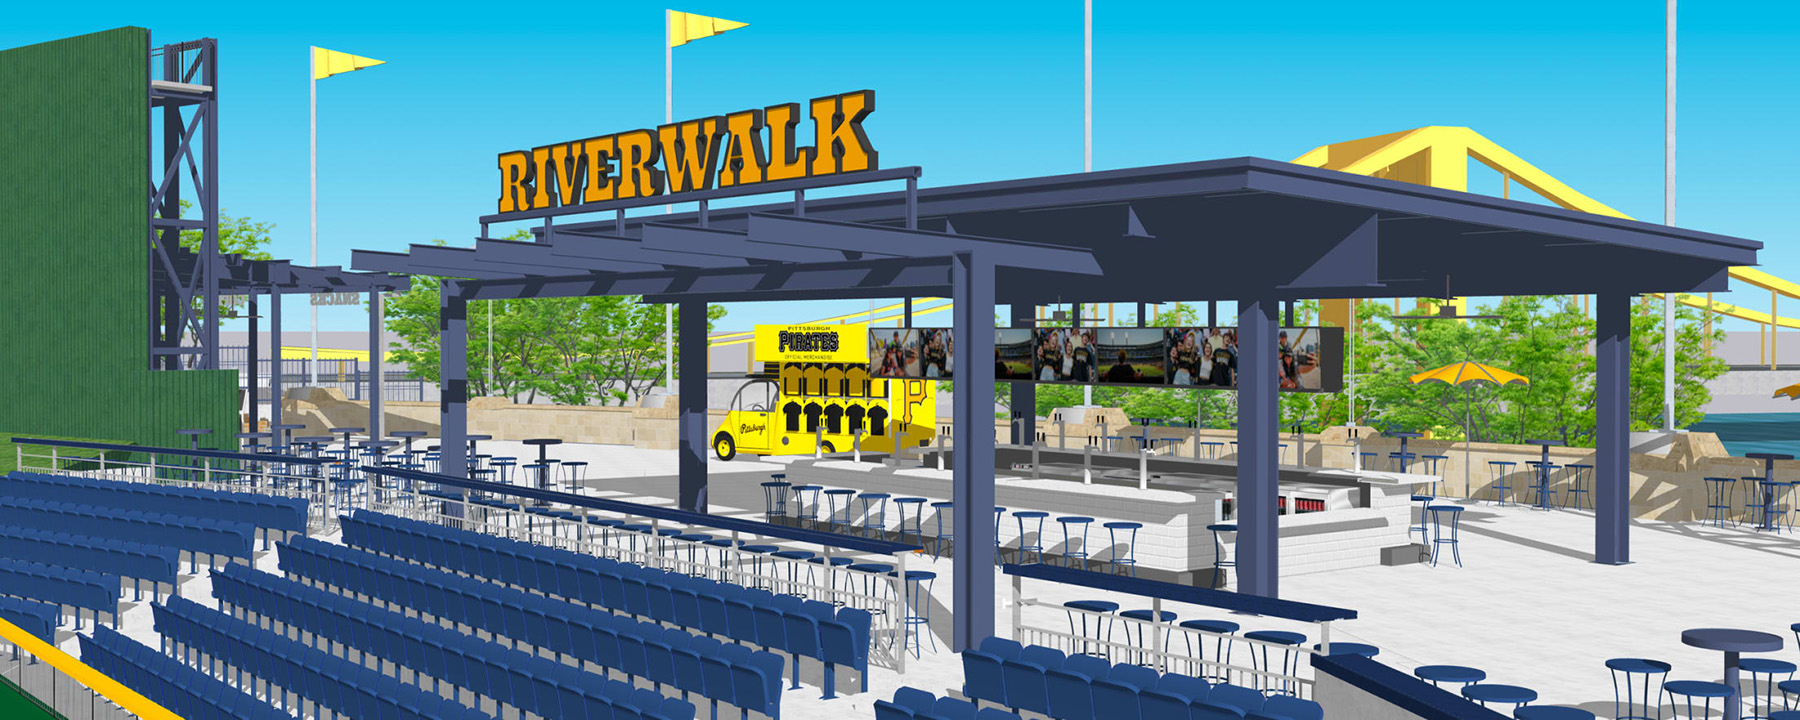 Pirates to serve up Pittsburgh food and drink this season at PNC Park